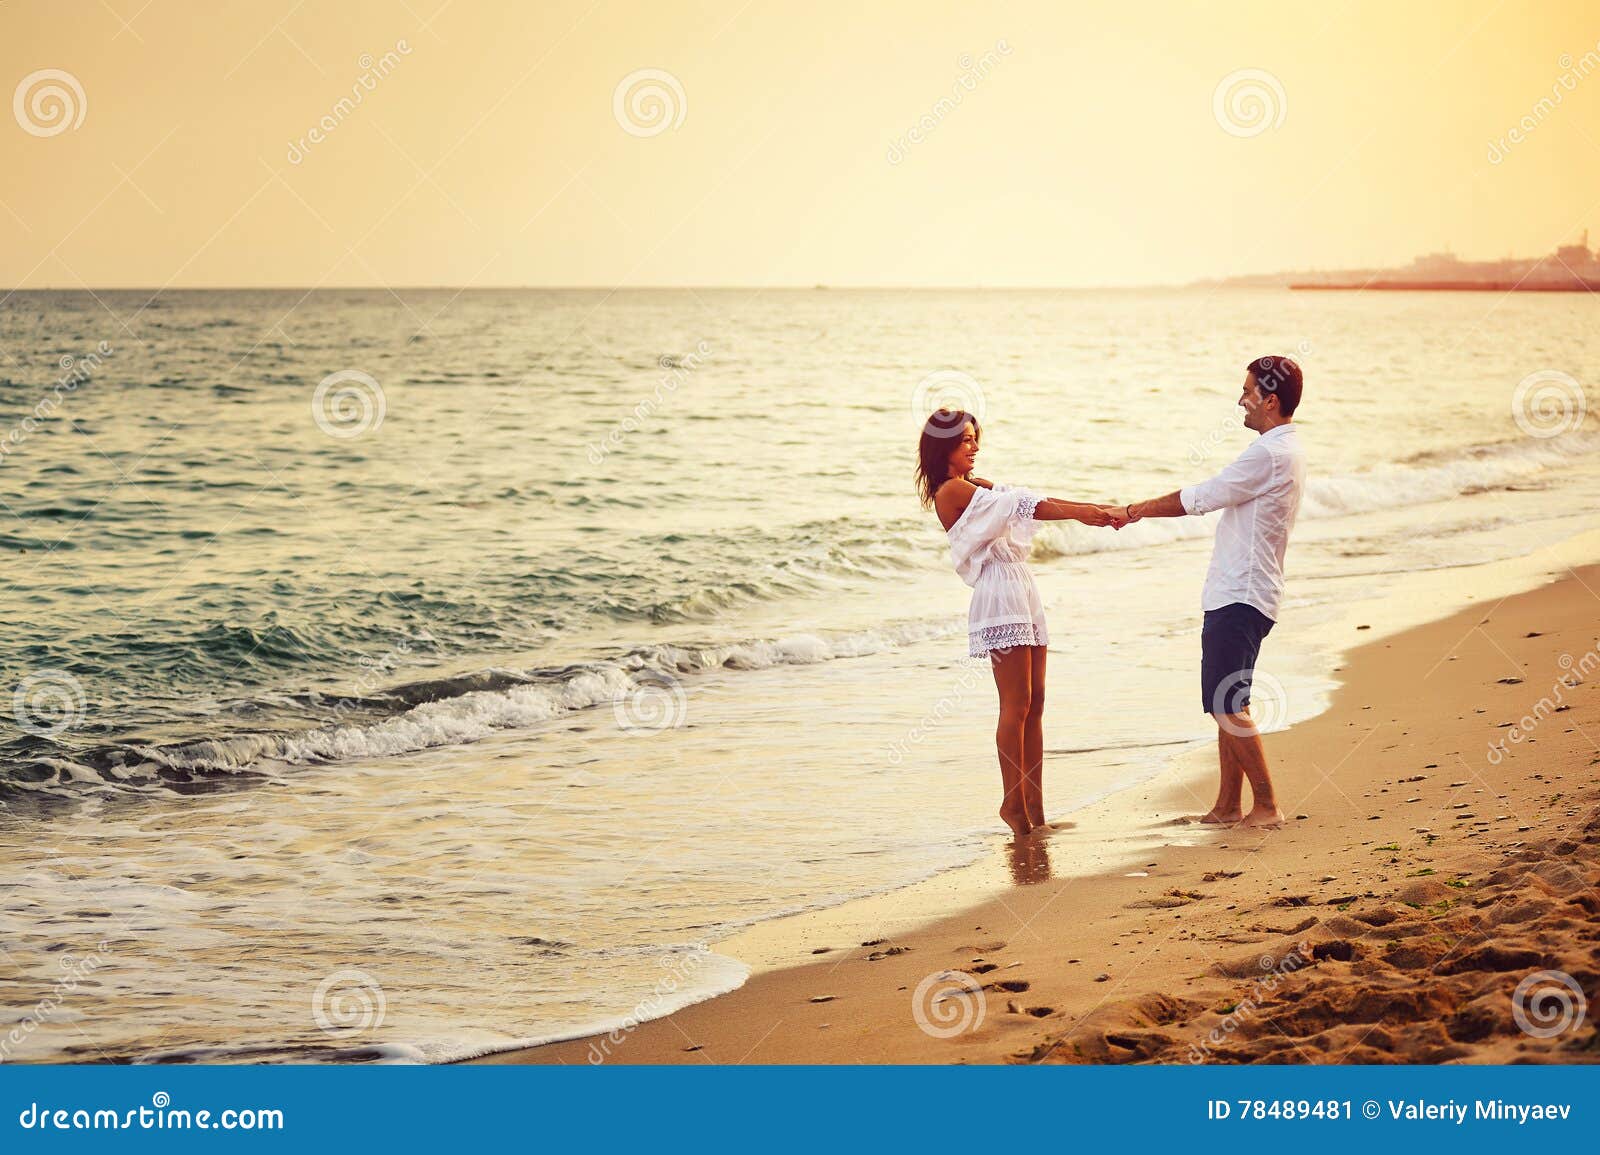 Beautiful Romantic Couple On The Sea Shore During Sunset Stock Image Image Of Ocean Date